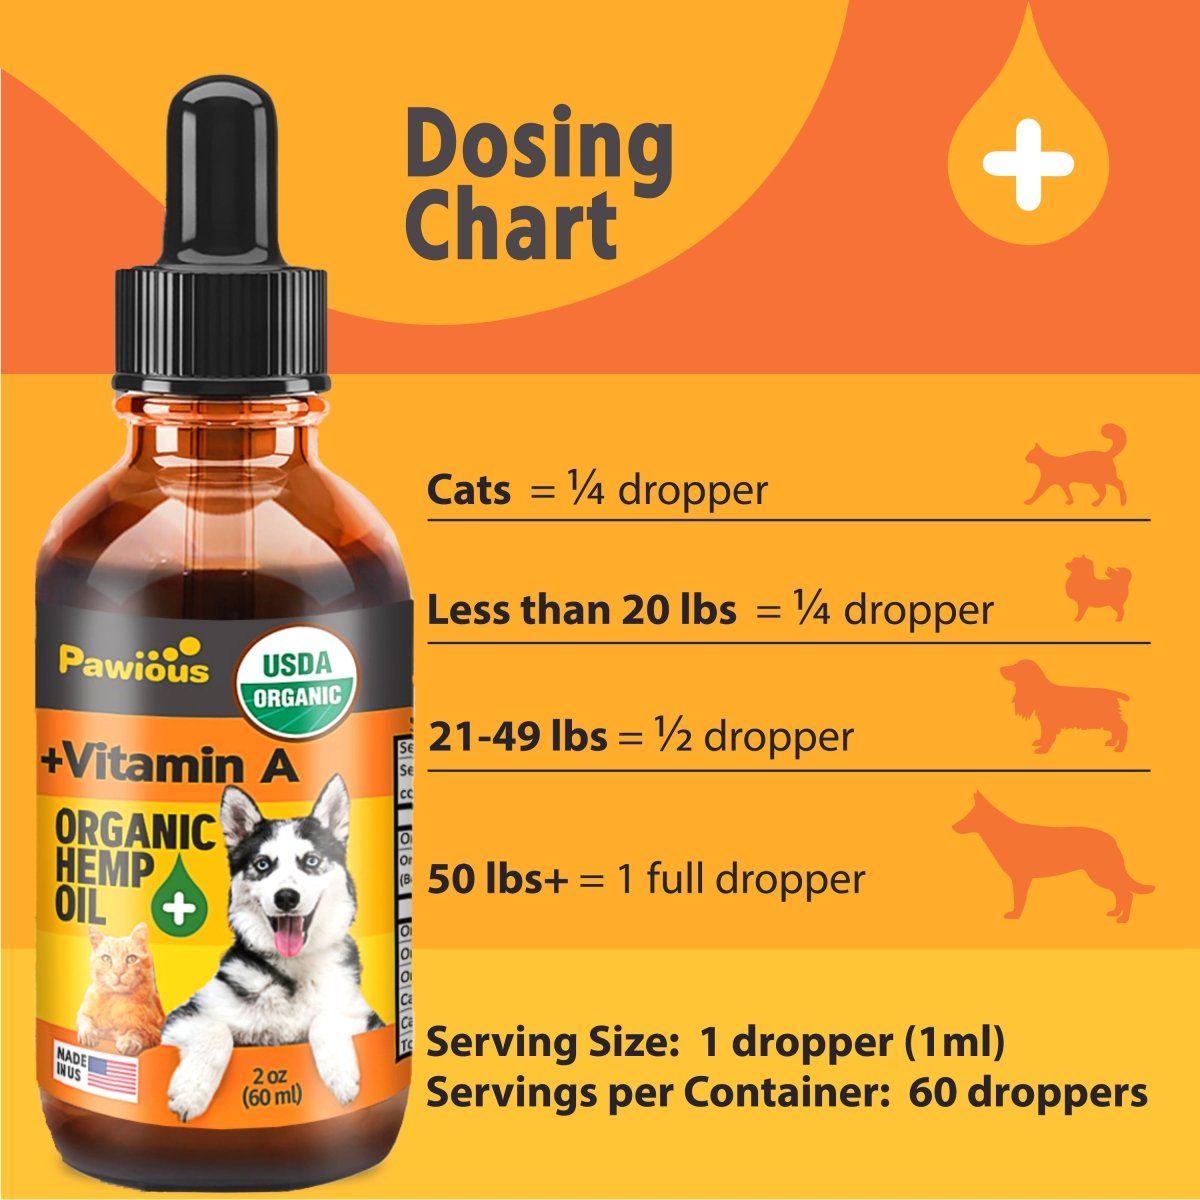 Hemp Oil for Dogs and Cats - USDA Organic, Large 2oz Bottle, Made in USA - Omega 3, 6 and 9, Vitamins A and E - Hip and Joint Support - Pawious